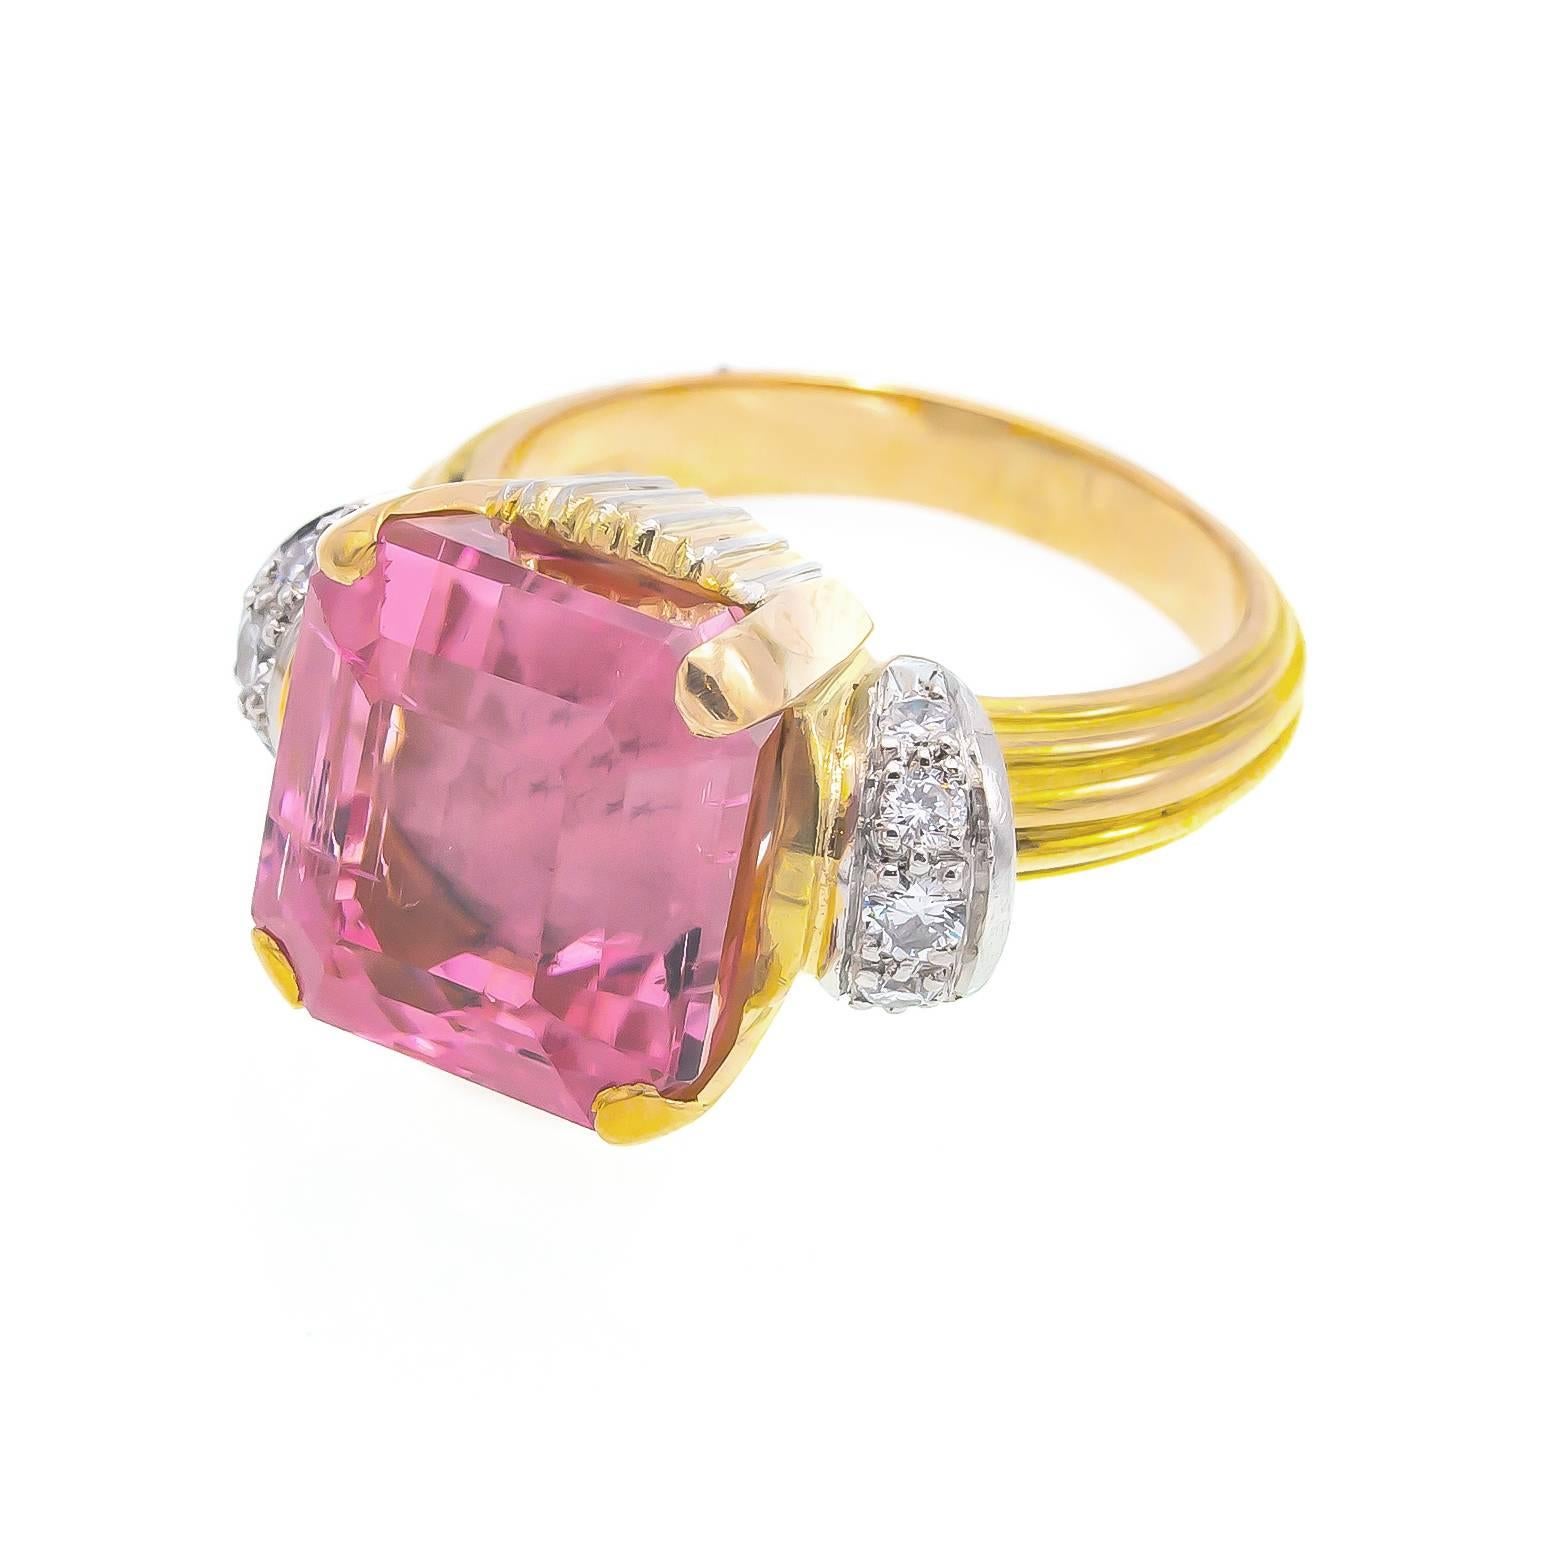 Women's  Pink Tourmaline Aprox. 11ct Ring with Accent Diamonds Iconic of the 1950's